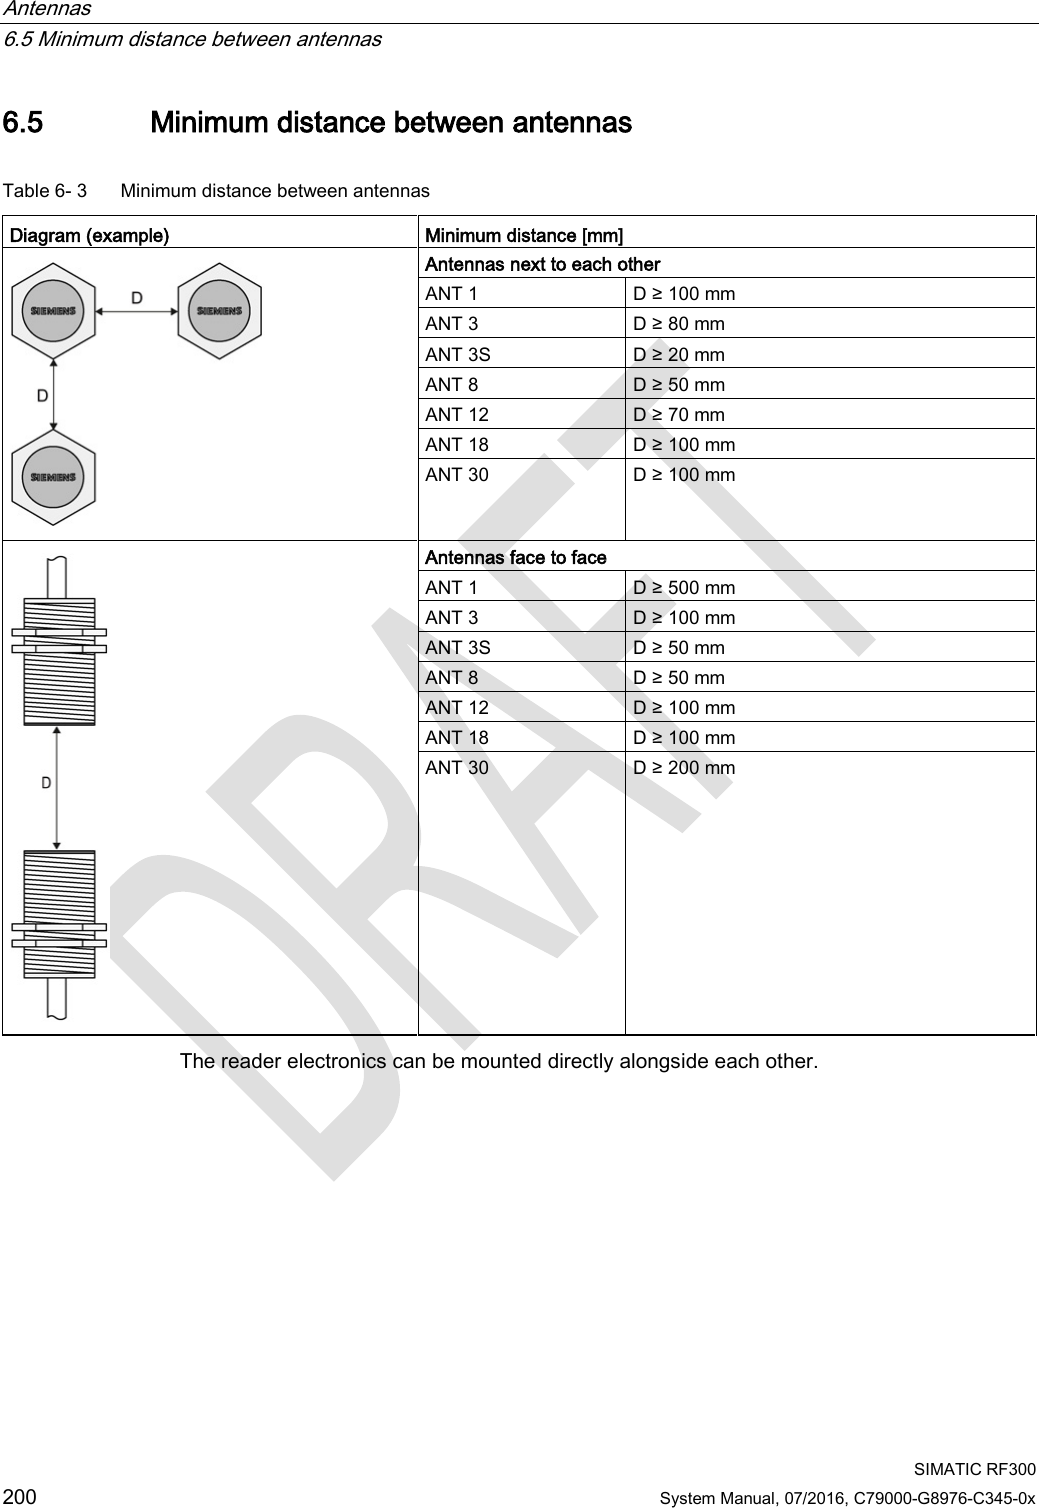 Antennas   6.5 Minimum distance between antennas  SIMATIC RF300 200 System Manual, 07/2016, C79000-G8976-C345-0x 6.5 Minimum distance between antennas Table 6- 3  Minimum distance between antennas  Diagram (example) Minimum distance [mm]  Antennas next to each other ANT 1 D ≥ 100 mm ANT 3 D ≥ 80 mm ANT 3S D ≥ 20 mm ANT 8 D ≥ 50 mm  ANT 12 D ≥ 70 mm ANT 18 D ≥ 100 mm ANT 30 D ≥ 100 mm  Antennas face to face ANT 1 D ≥ 500 mm ANT 3 D ≥ 100 mm ANT 3S D ≥ 50 mm  ANT 8 D ≥ 50 mm ANT 12 D ≥ 100 mm ANT 18 D ≥ 100 mm ANT 30 D ≥ 200 mm The reader electronics can be mounted directly alongside each other. 